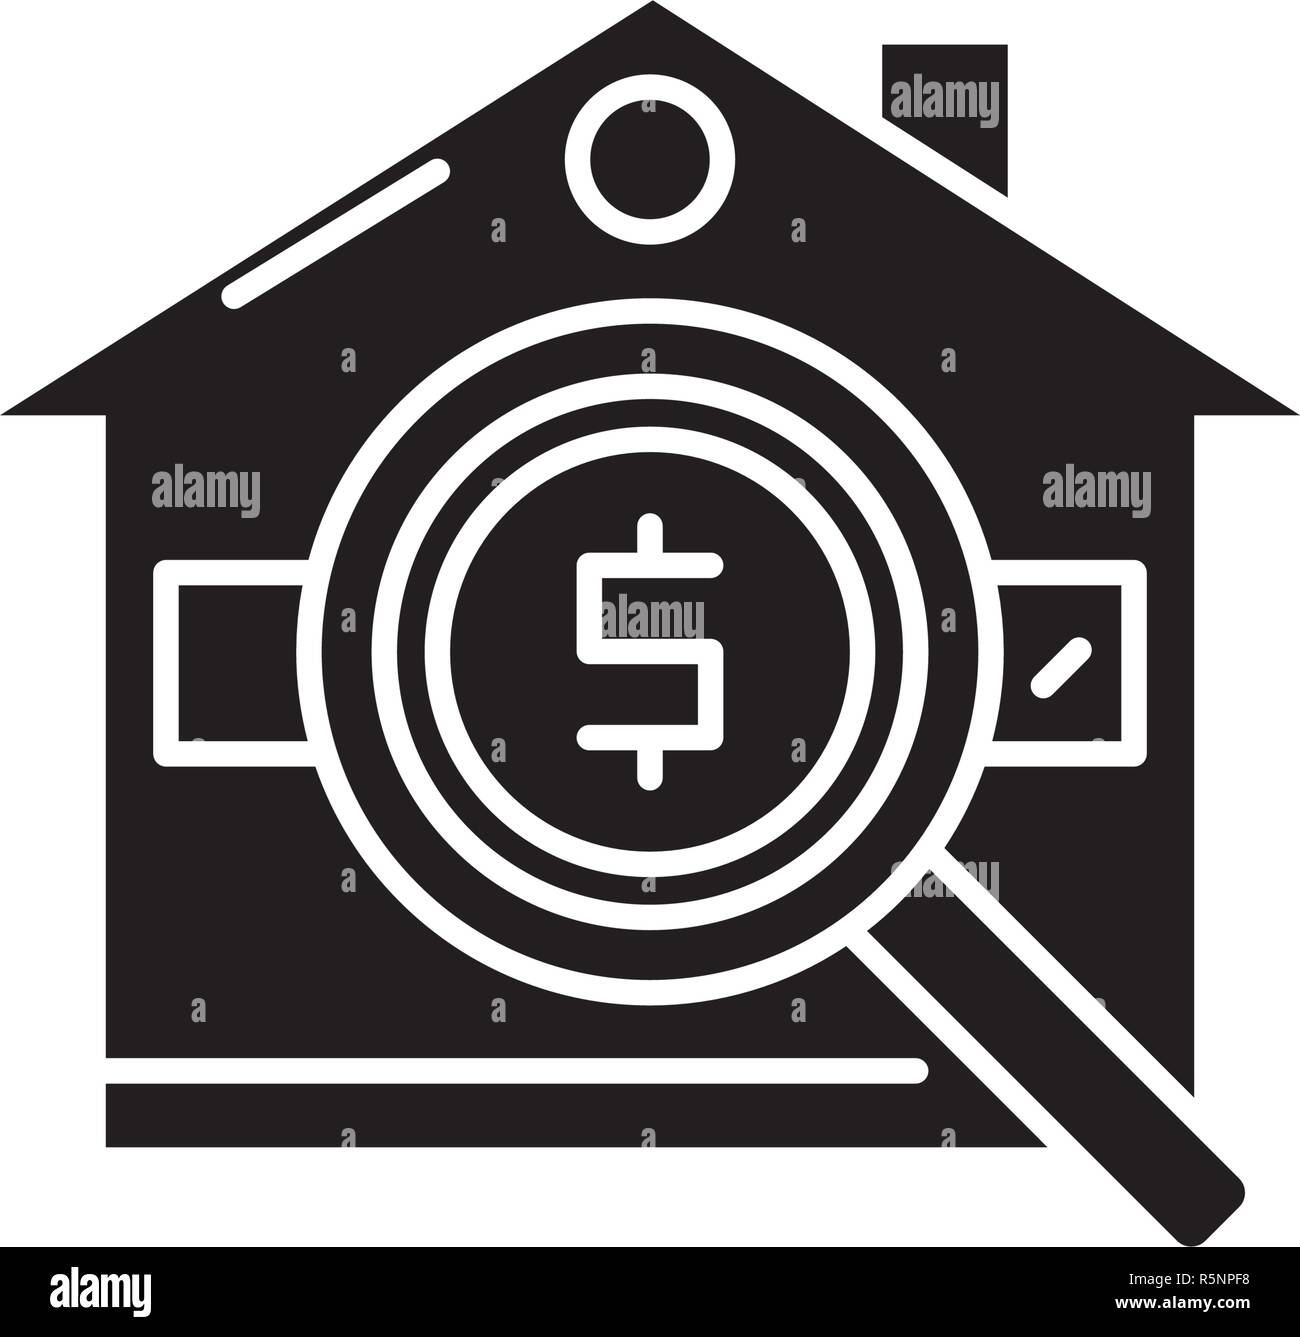 Analysis of real estate prices black icon, vector sign on isolated background. Analysis of real estate prices concept symbol, illustration  Stock Vector